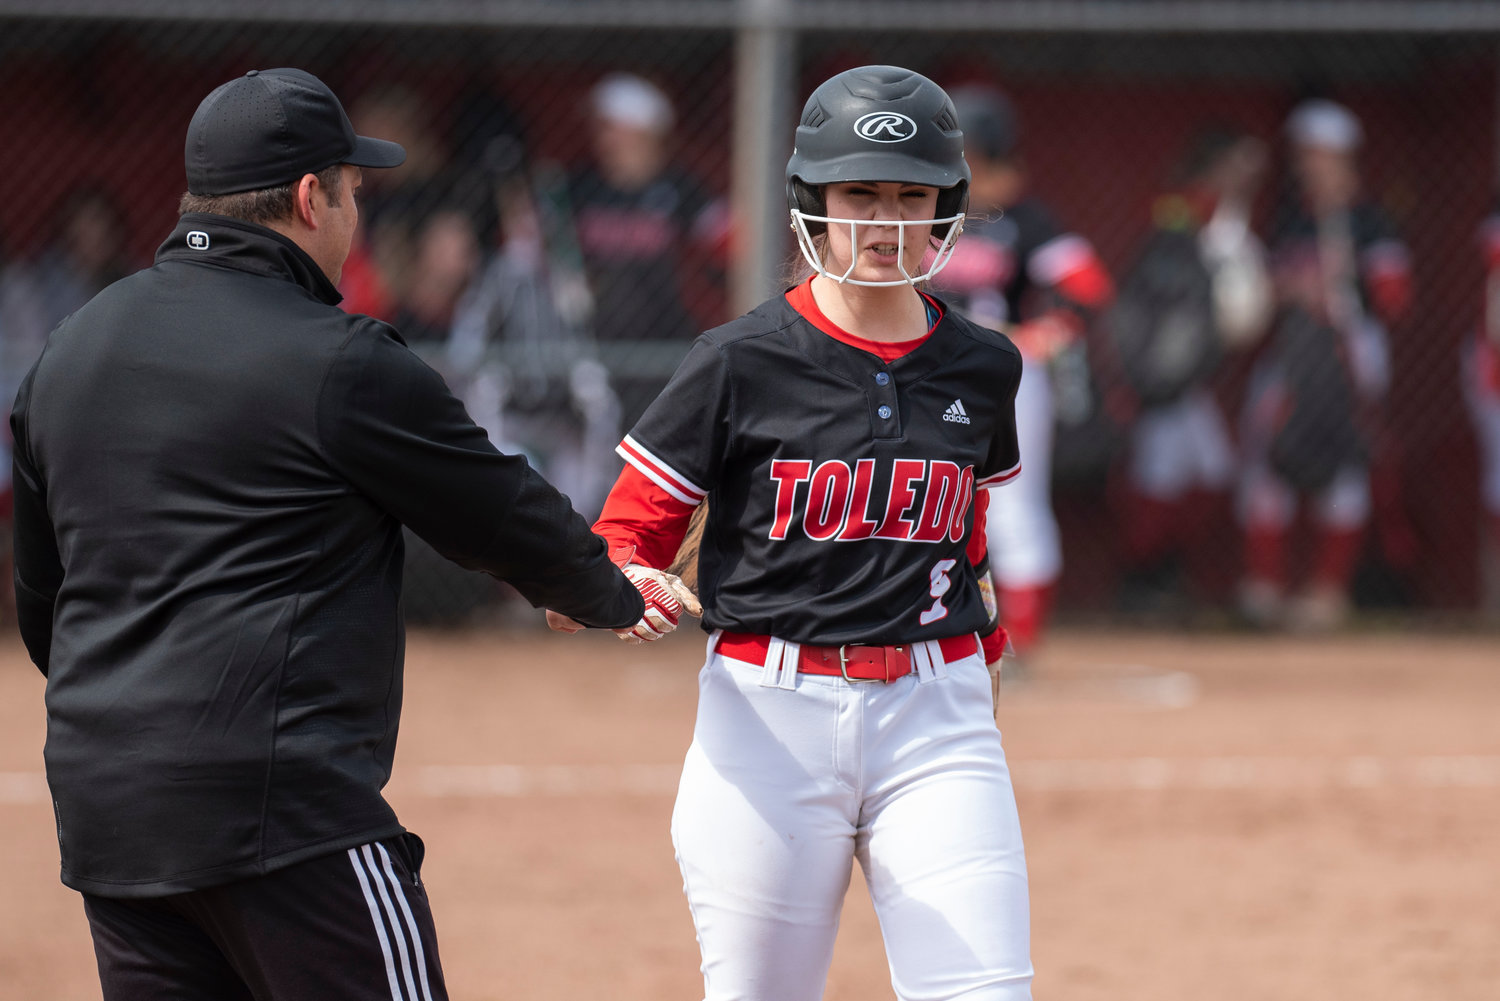 Toledo's Averie Robins, right, fist-bumps assistant coach Horst Malunat after being hit by a pitch during a home game against Rainier on April 25.